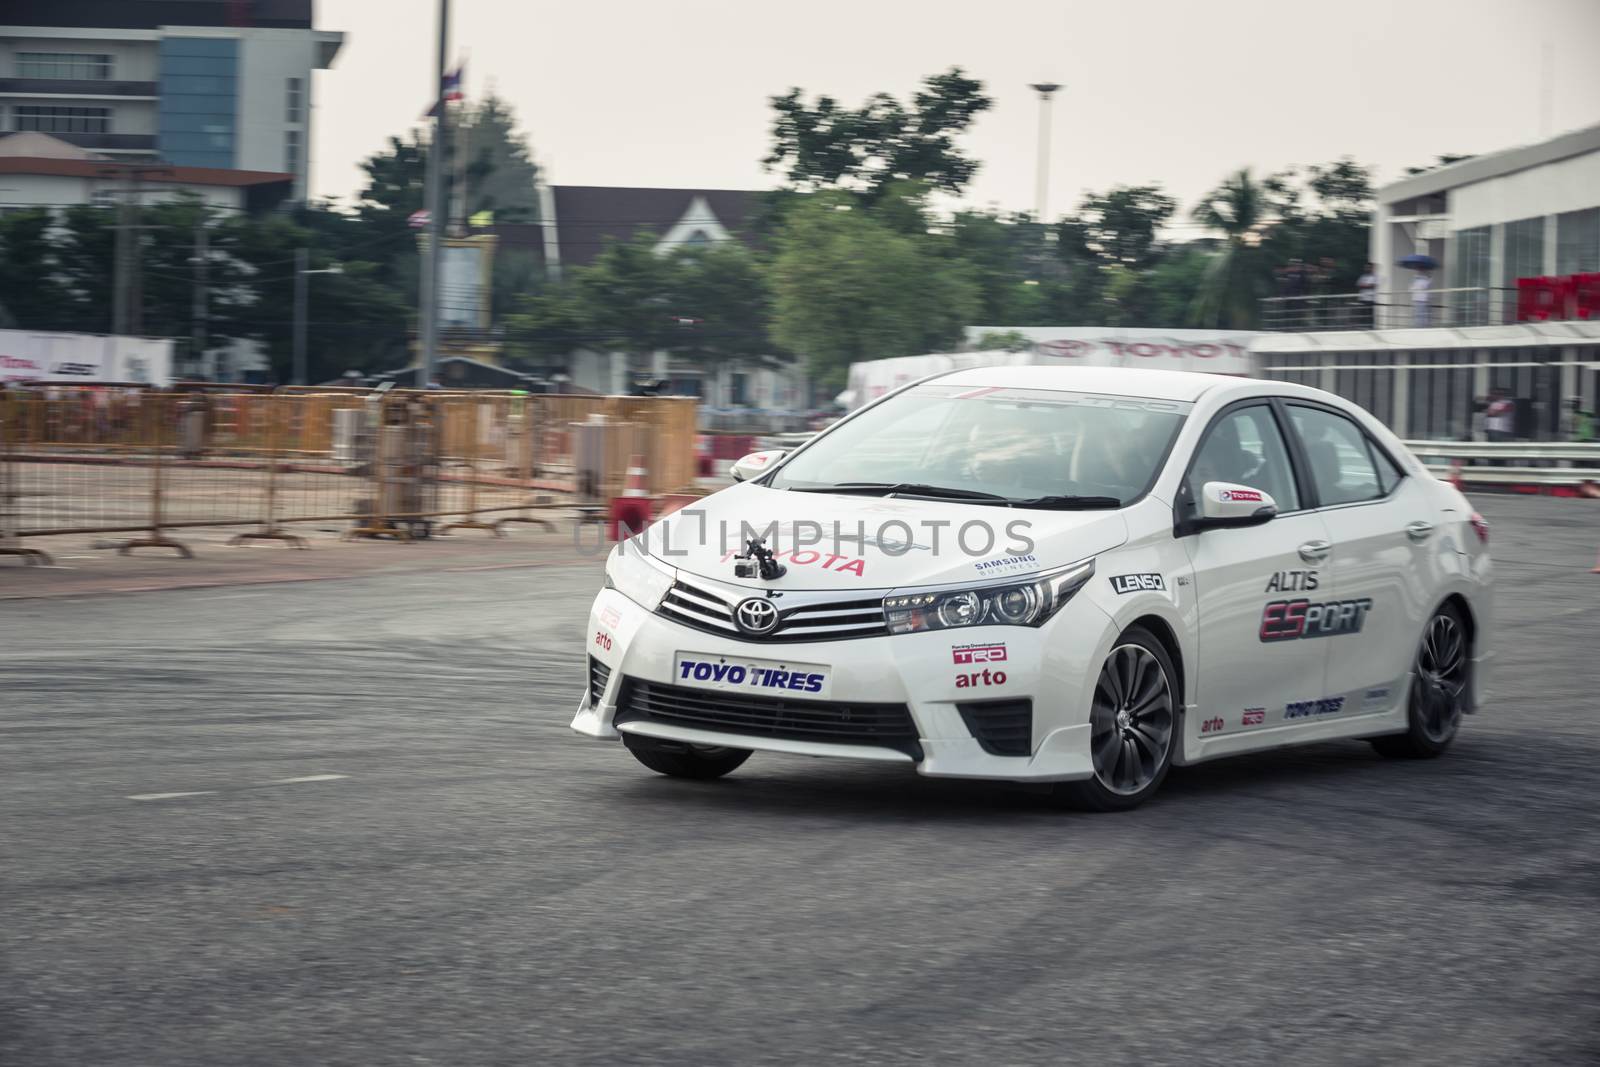 Udon Thani, Thailand - October 18, 2015: Toyota Colora Altis perform drifting on the track at the event Toyota Motor Sport show at Udon Thani, Thailand